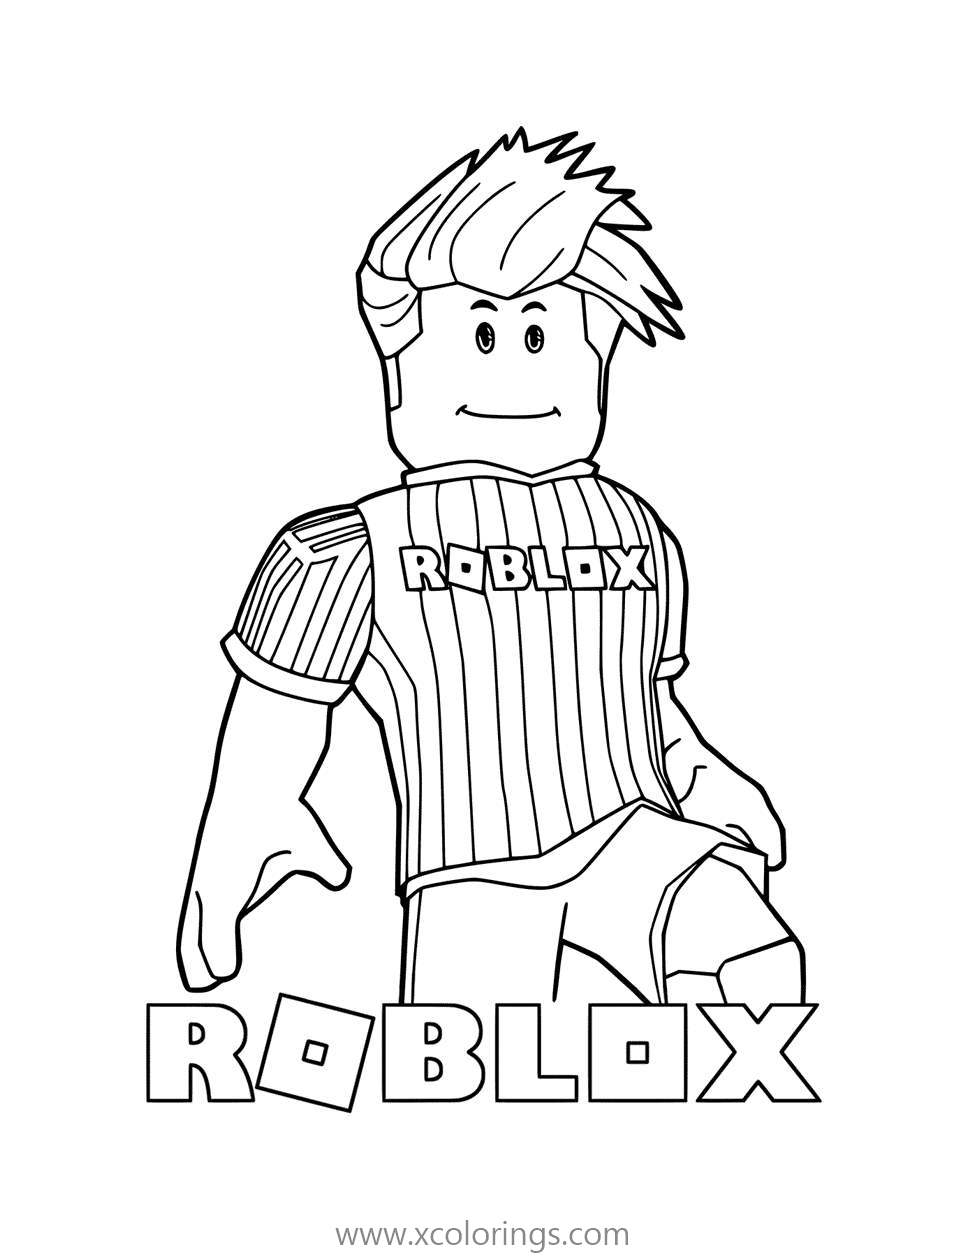 Free Video Gmae Roblox Coloring Pages printable